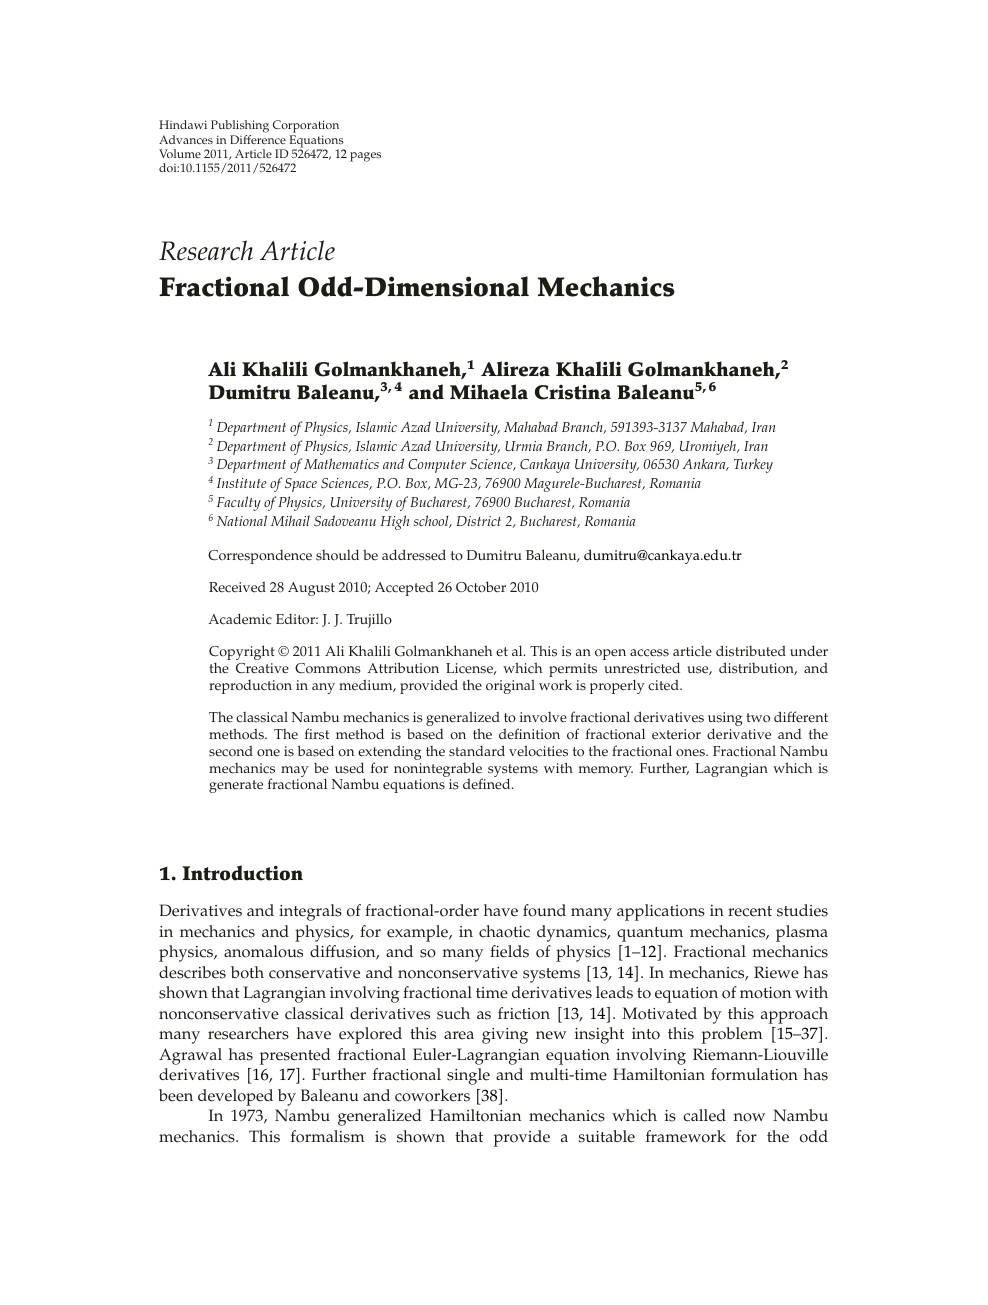 Fractional Odd Dimensional Mechanics Topic Of Research Paper In Mathematics Download Scholarly Article Pdf And Read For Free On Cyberleninka Open Science Hub